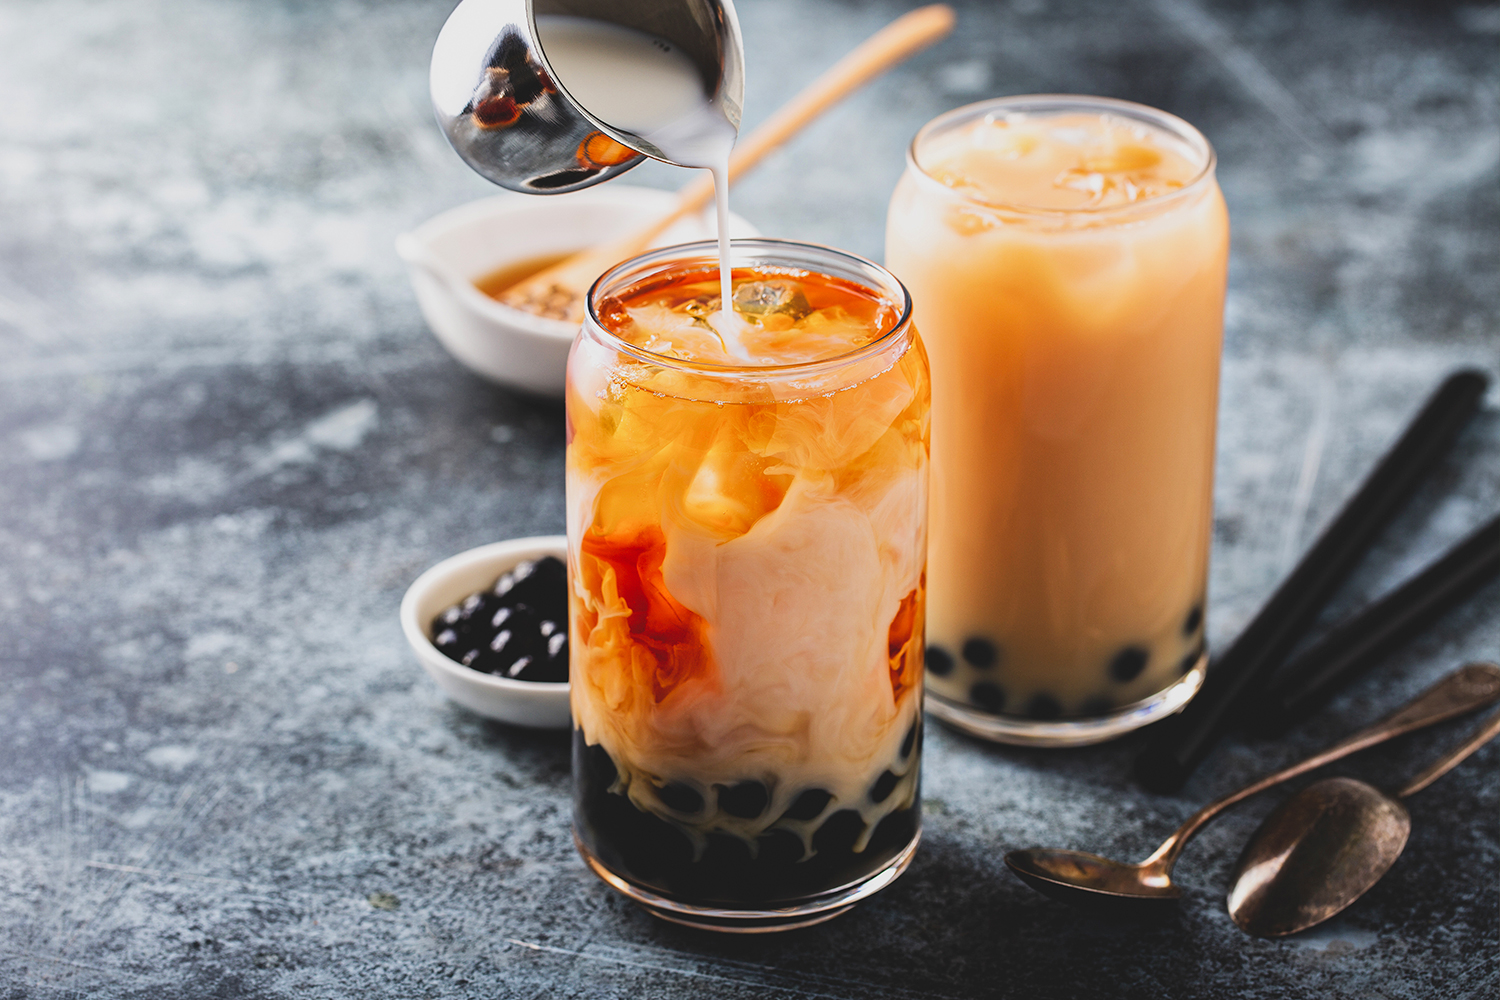 Milk tea, boba, and tapioca pearls served in a glass with more toppings on the side